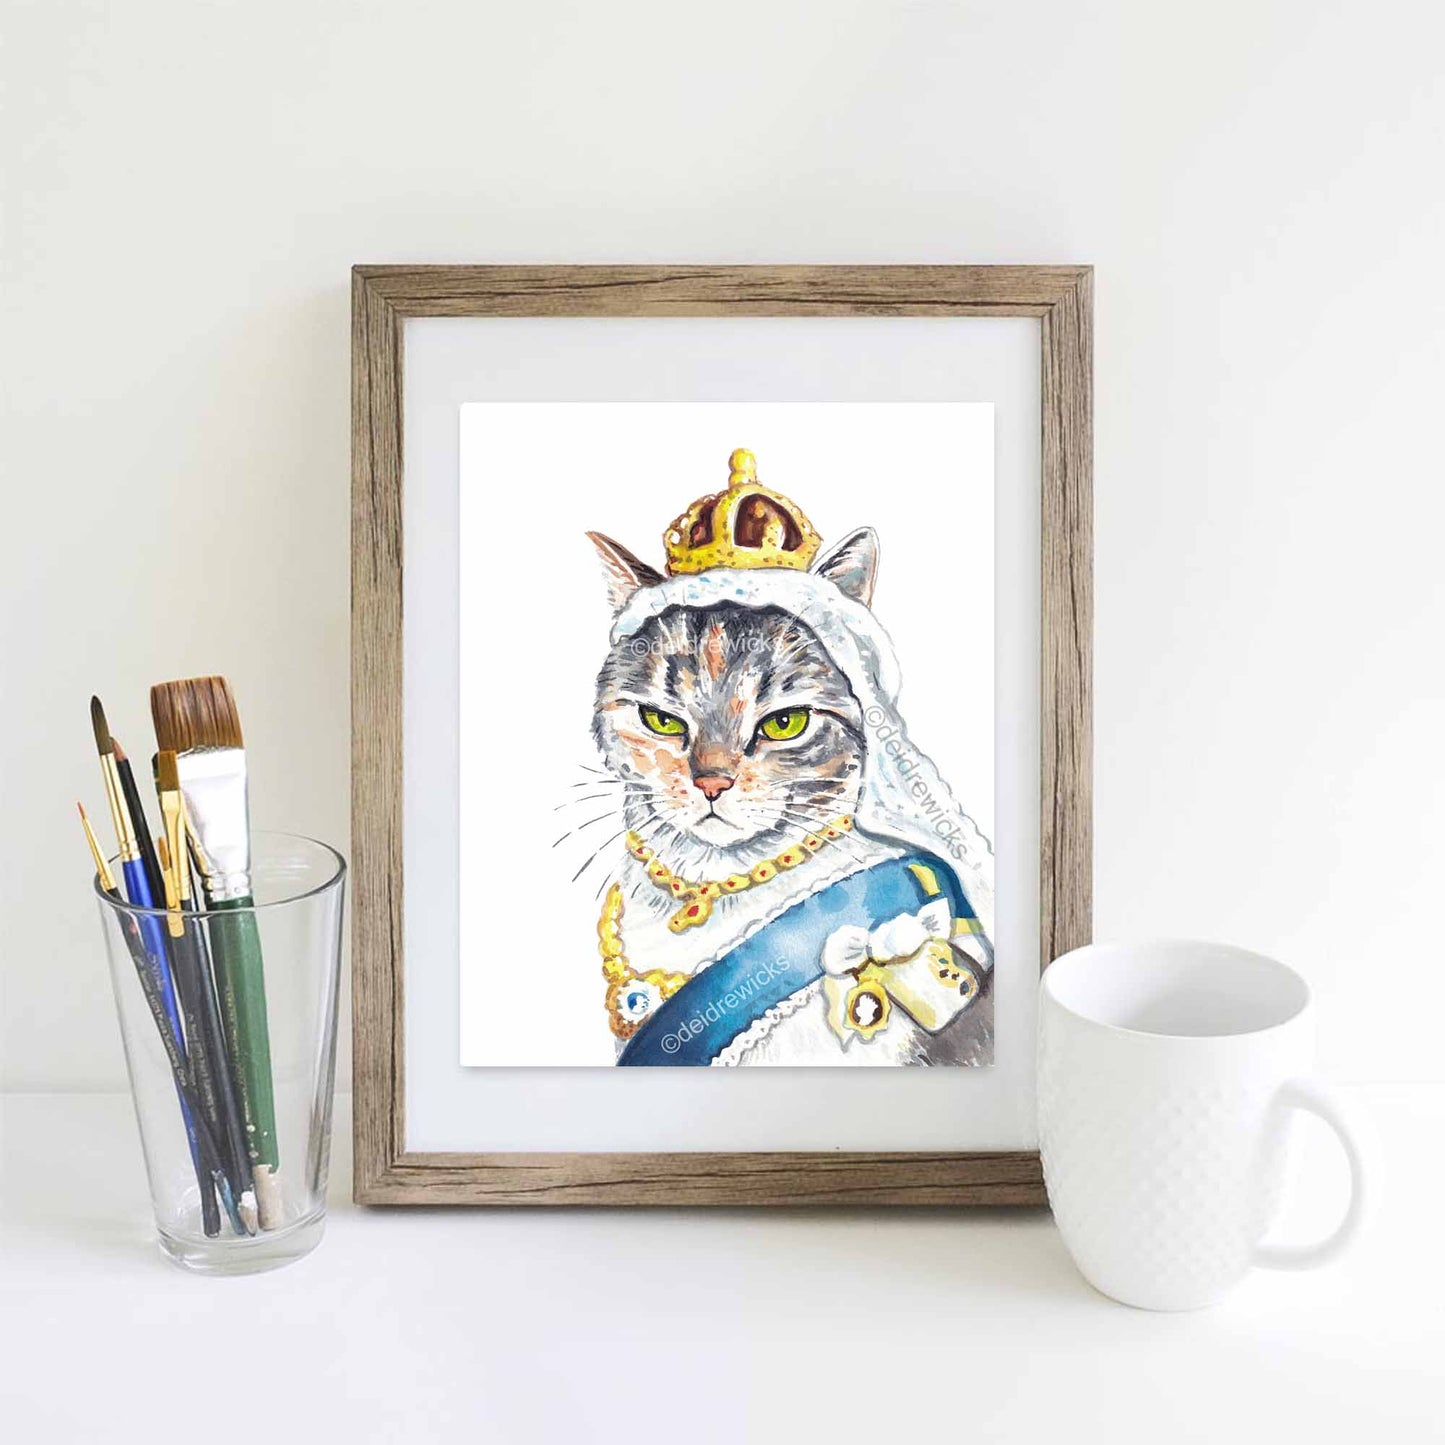 Example framing for a cat watercolour print by Deidre Wicks